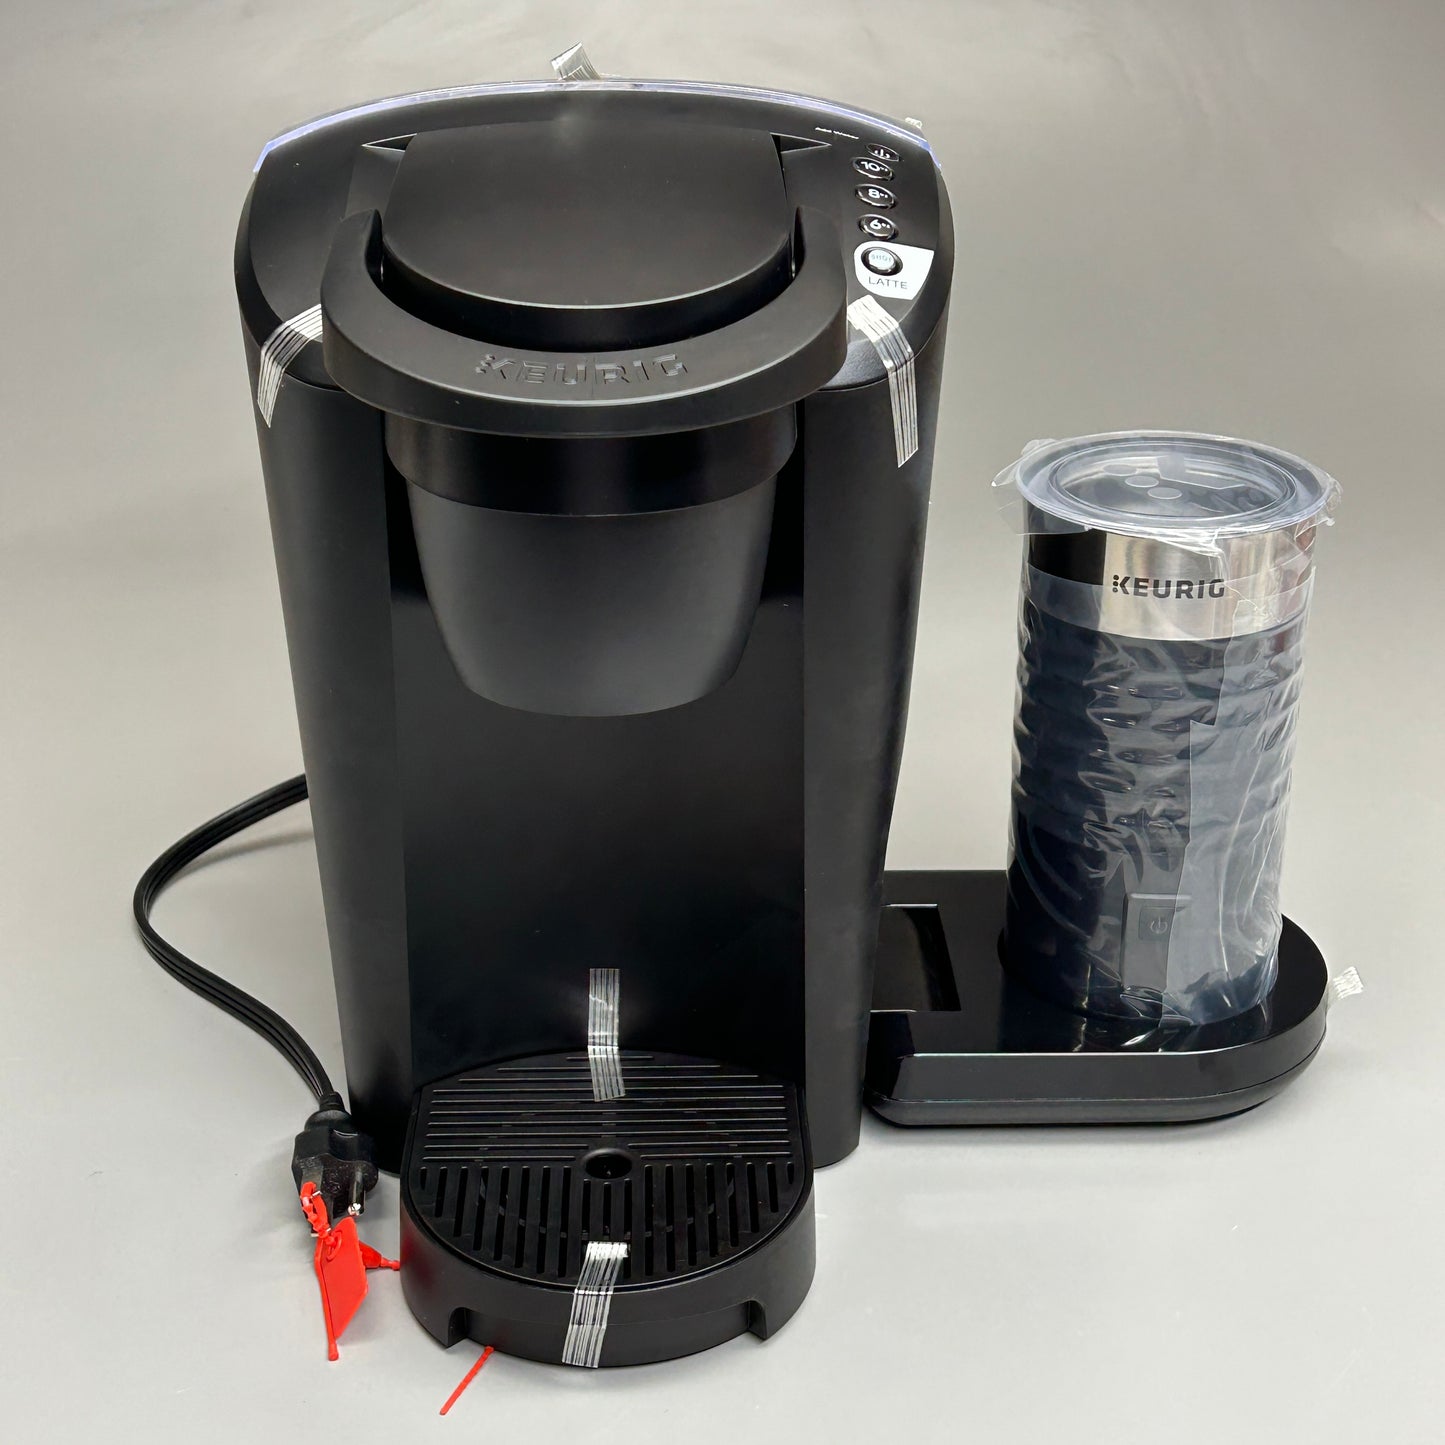 KEURIG K-Latte Single Serve Coffee and Latte Maker with Milk Frother Black (New)